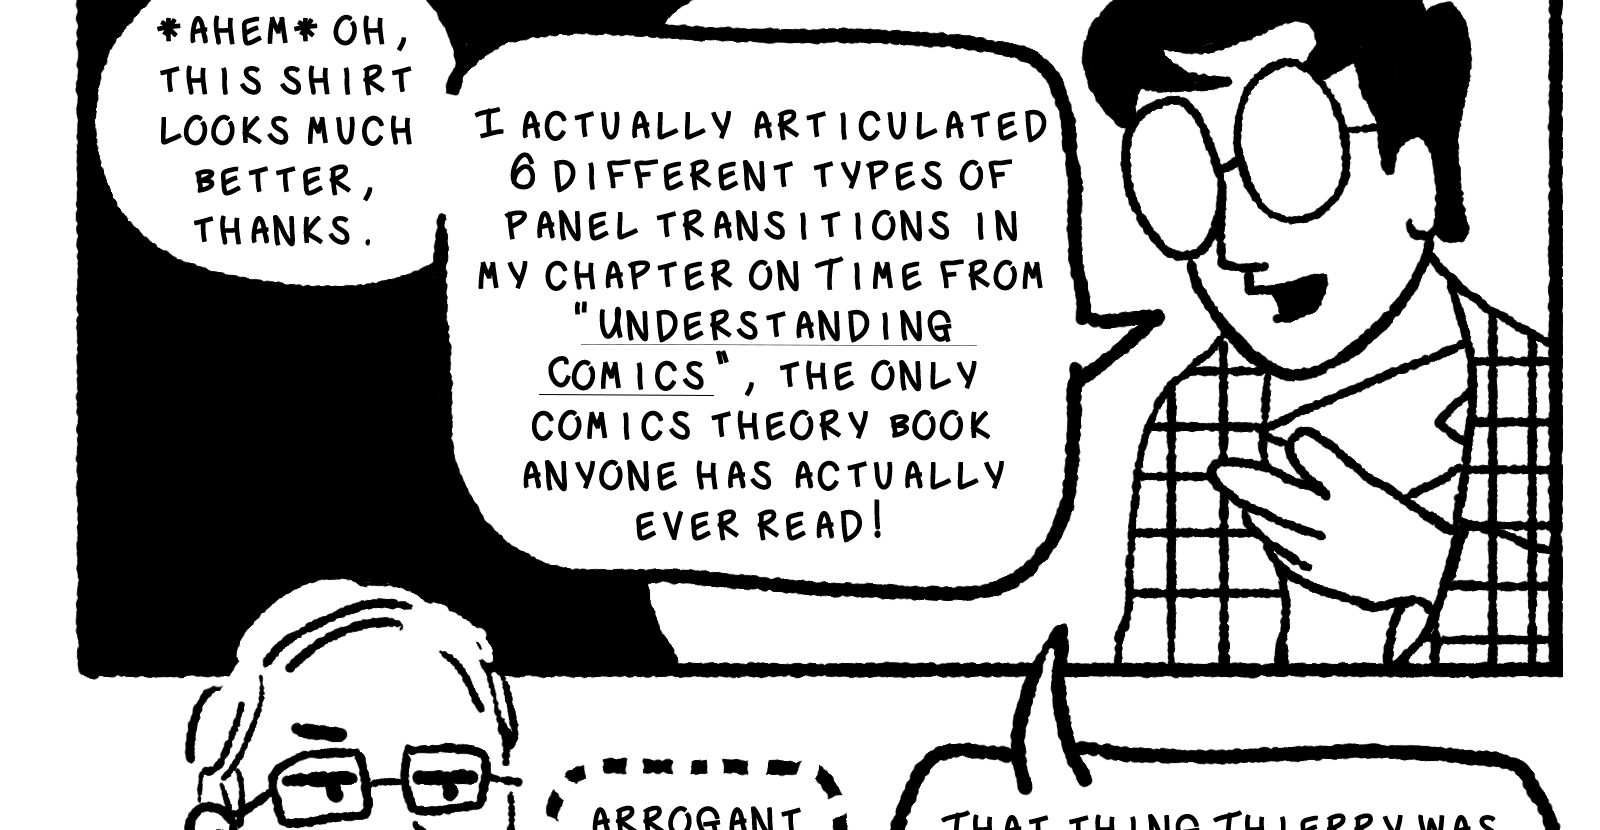 McCloud dominates the next panel, commenting, *ahem* Oh this shirt looks much better, thanks. I actually articulated 6 different types of panel transitions in my chapter on time from Understanding Comics [link], the only comics theory book anyone has actually ever read!